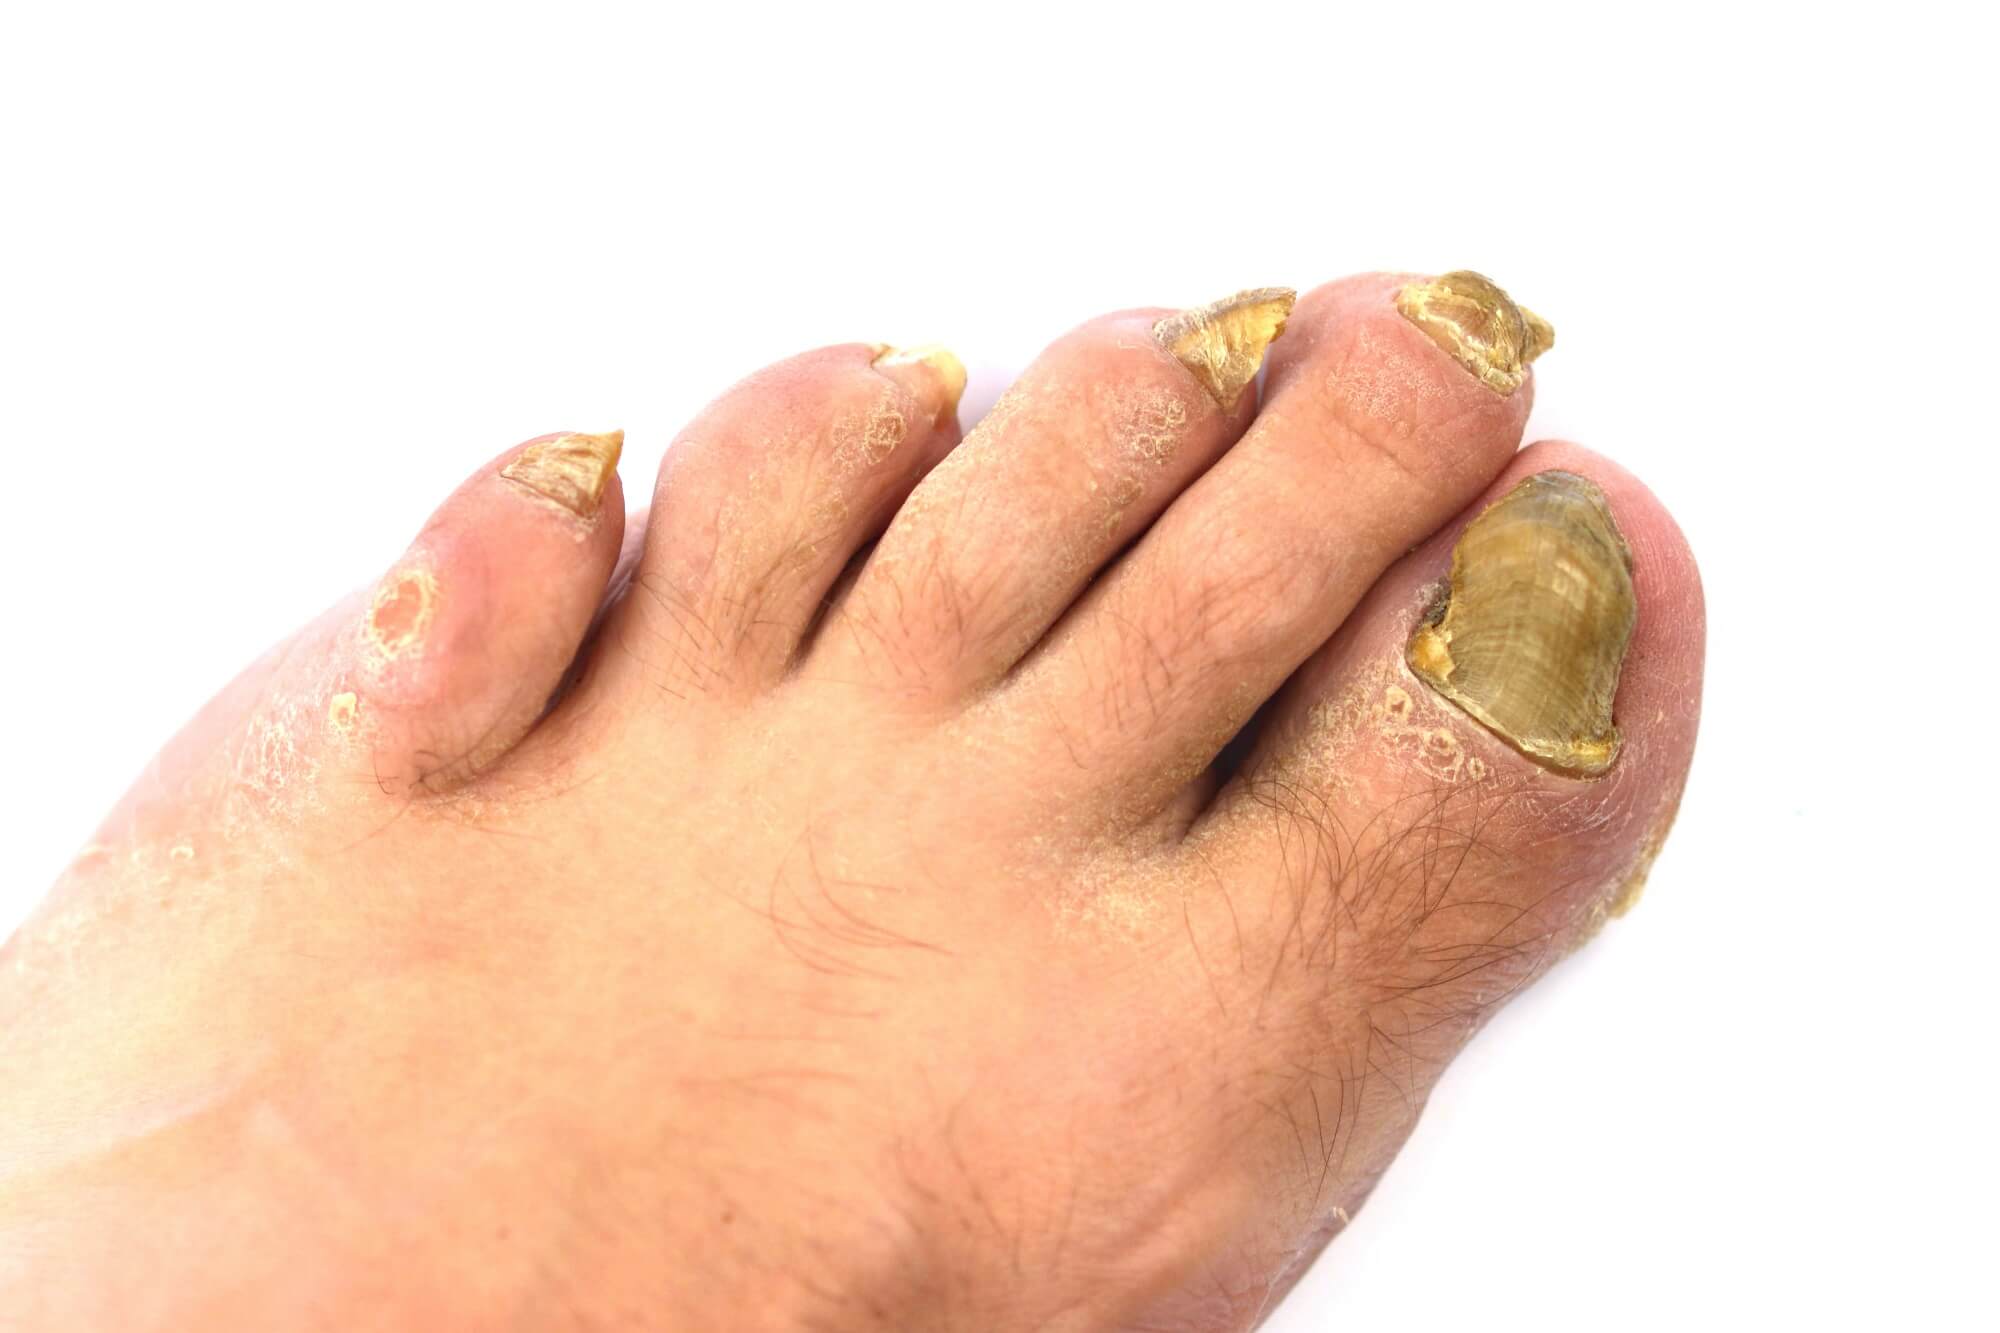 A picture of toenail fungus (onychomycosis)